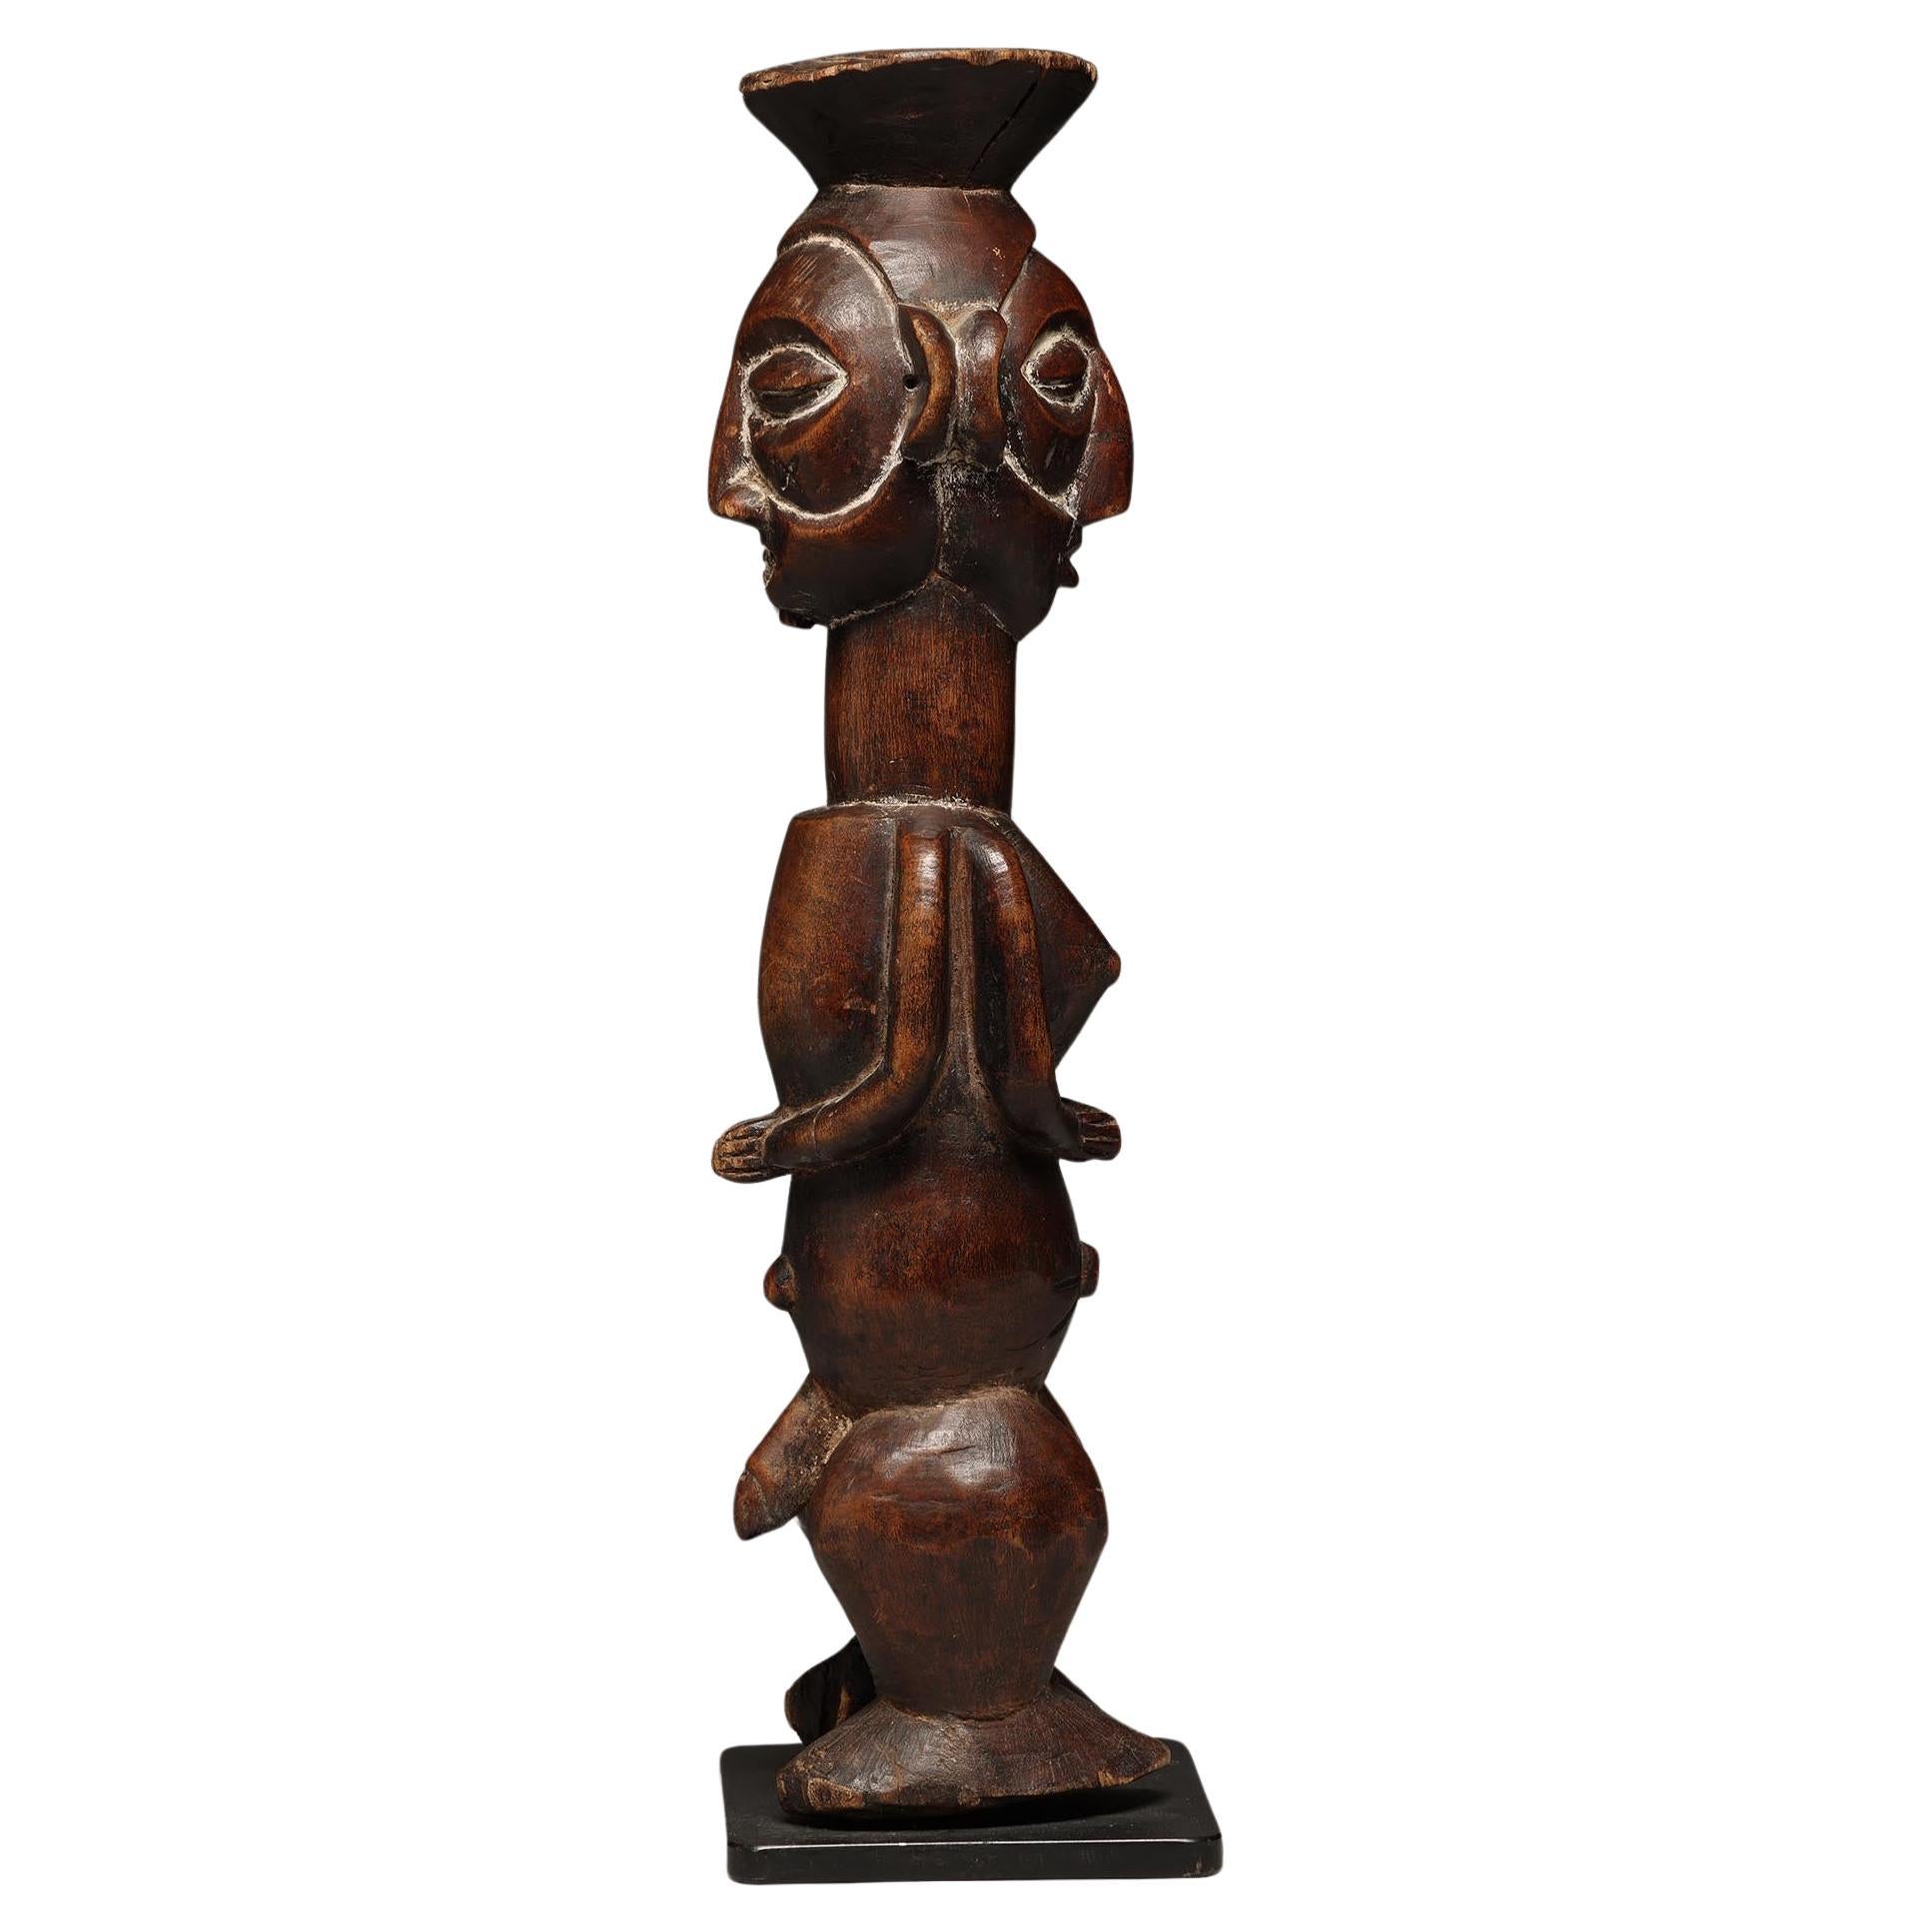 Yaka Carved wood standing Janus back to back male/female divination figure DRC Congo, Africa
The figure is 17 1/2